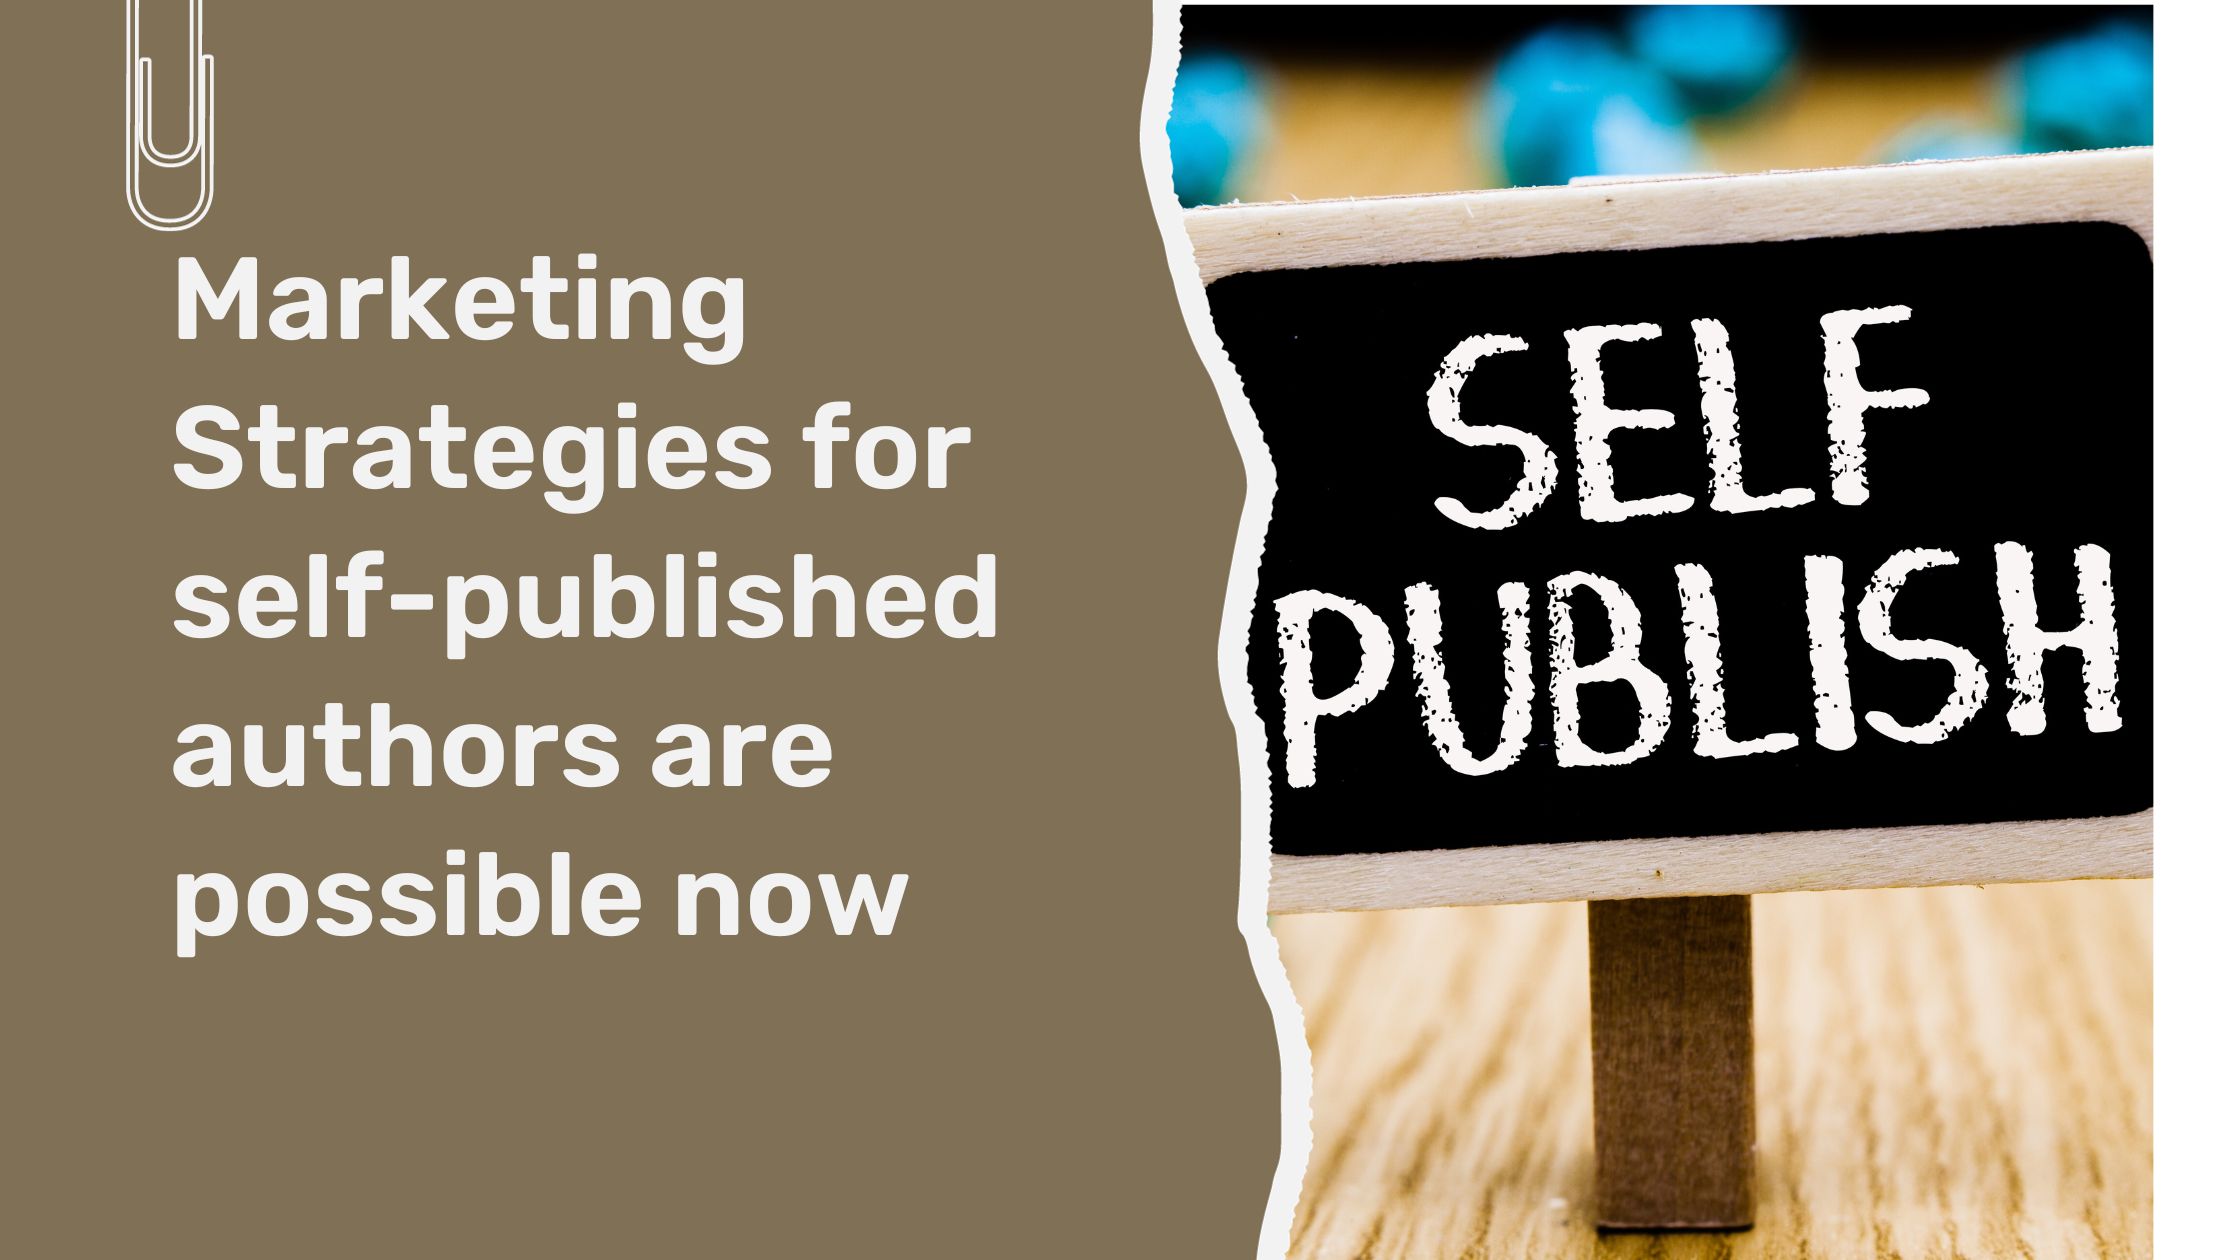 Marketing Strategies for self-published authors are possible now